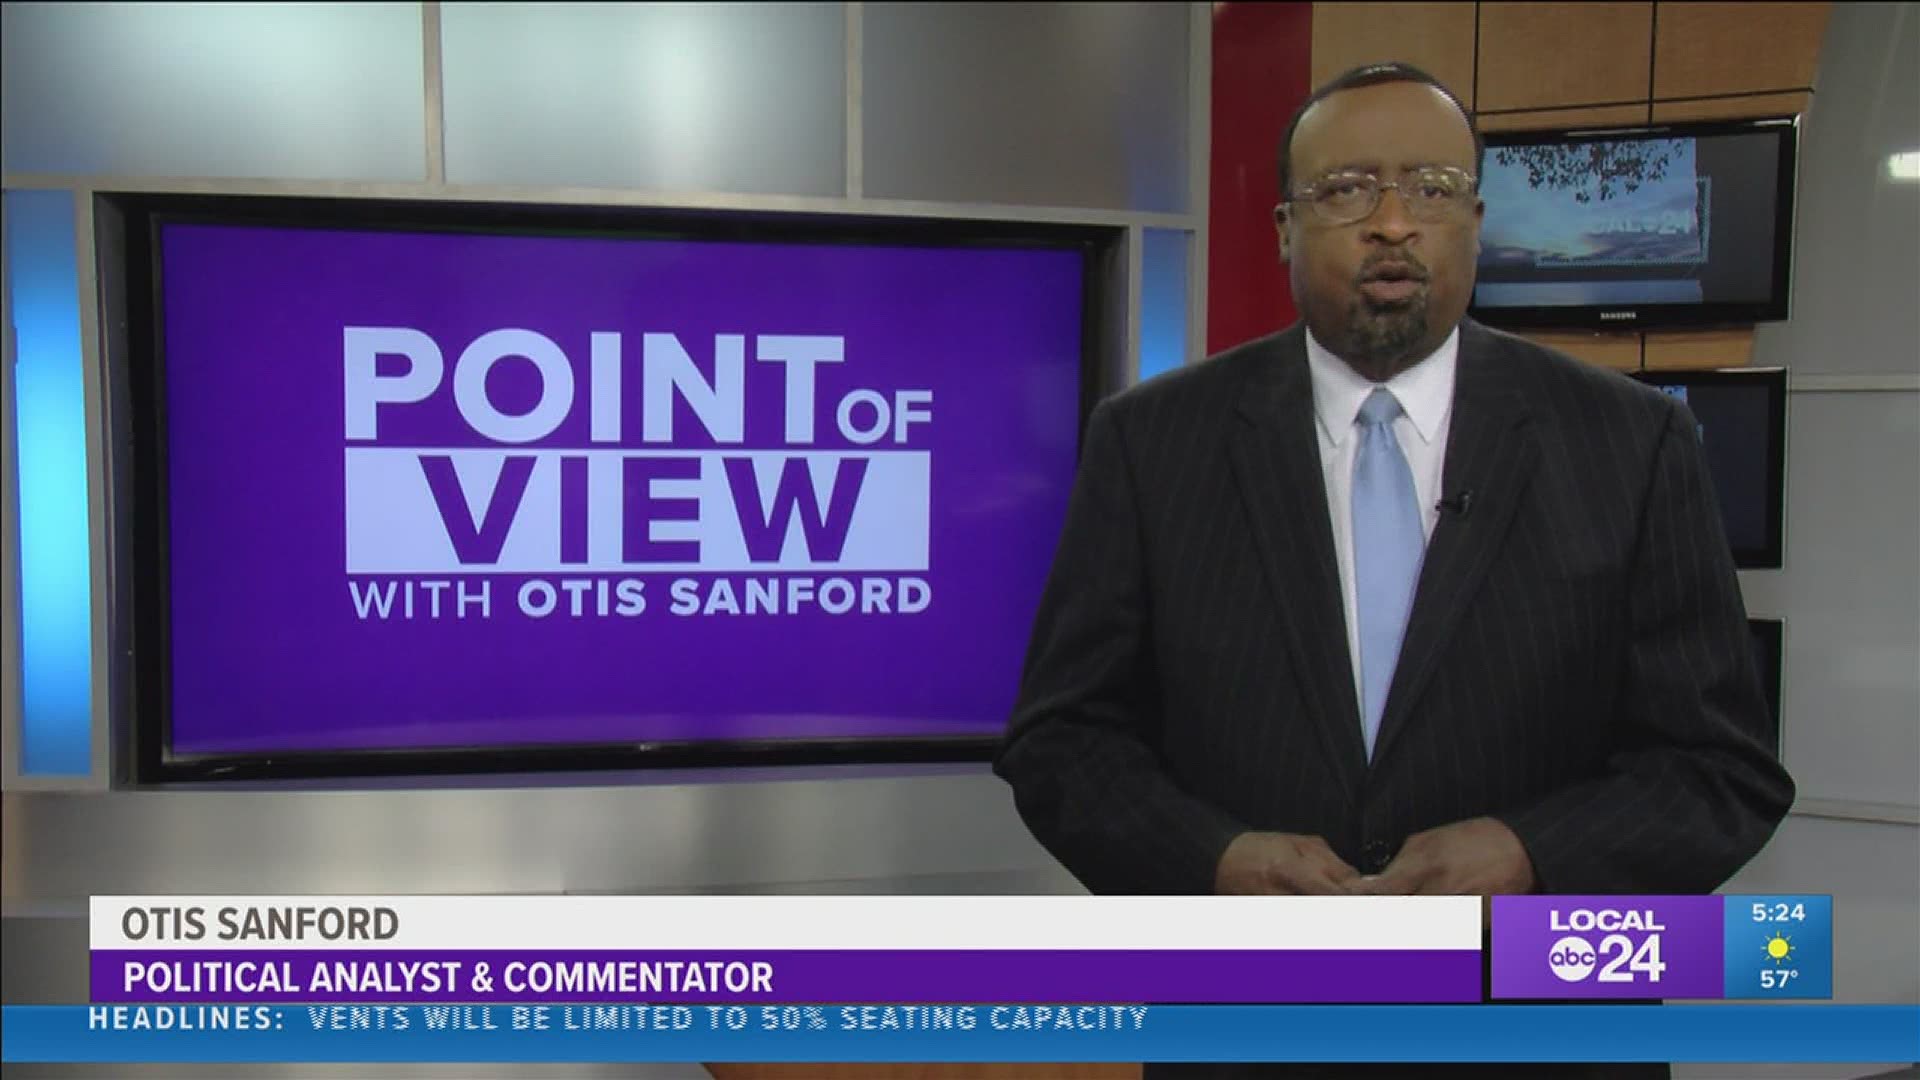 Local 24 News political analyst and commentator Otis Sanford shares his point of view on the federal mass vaccination site in Memphis.